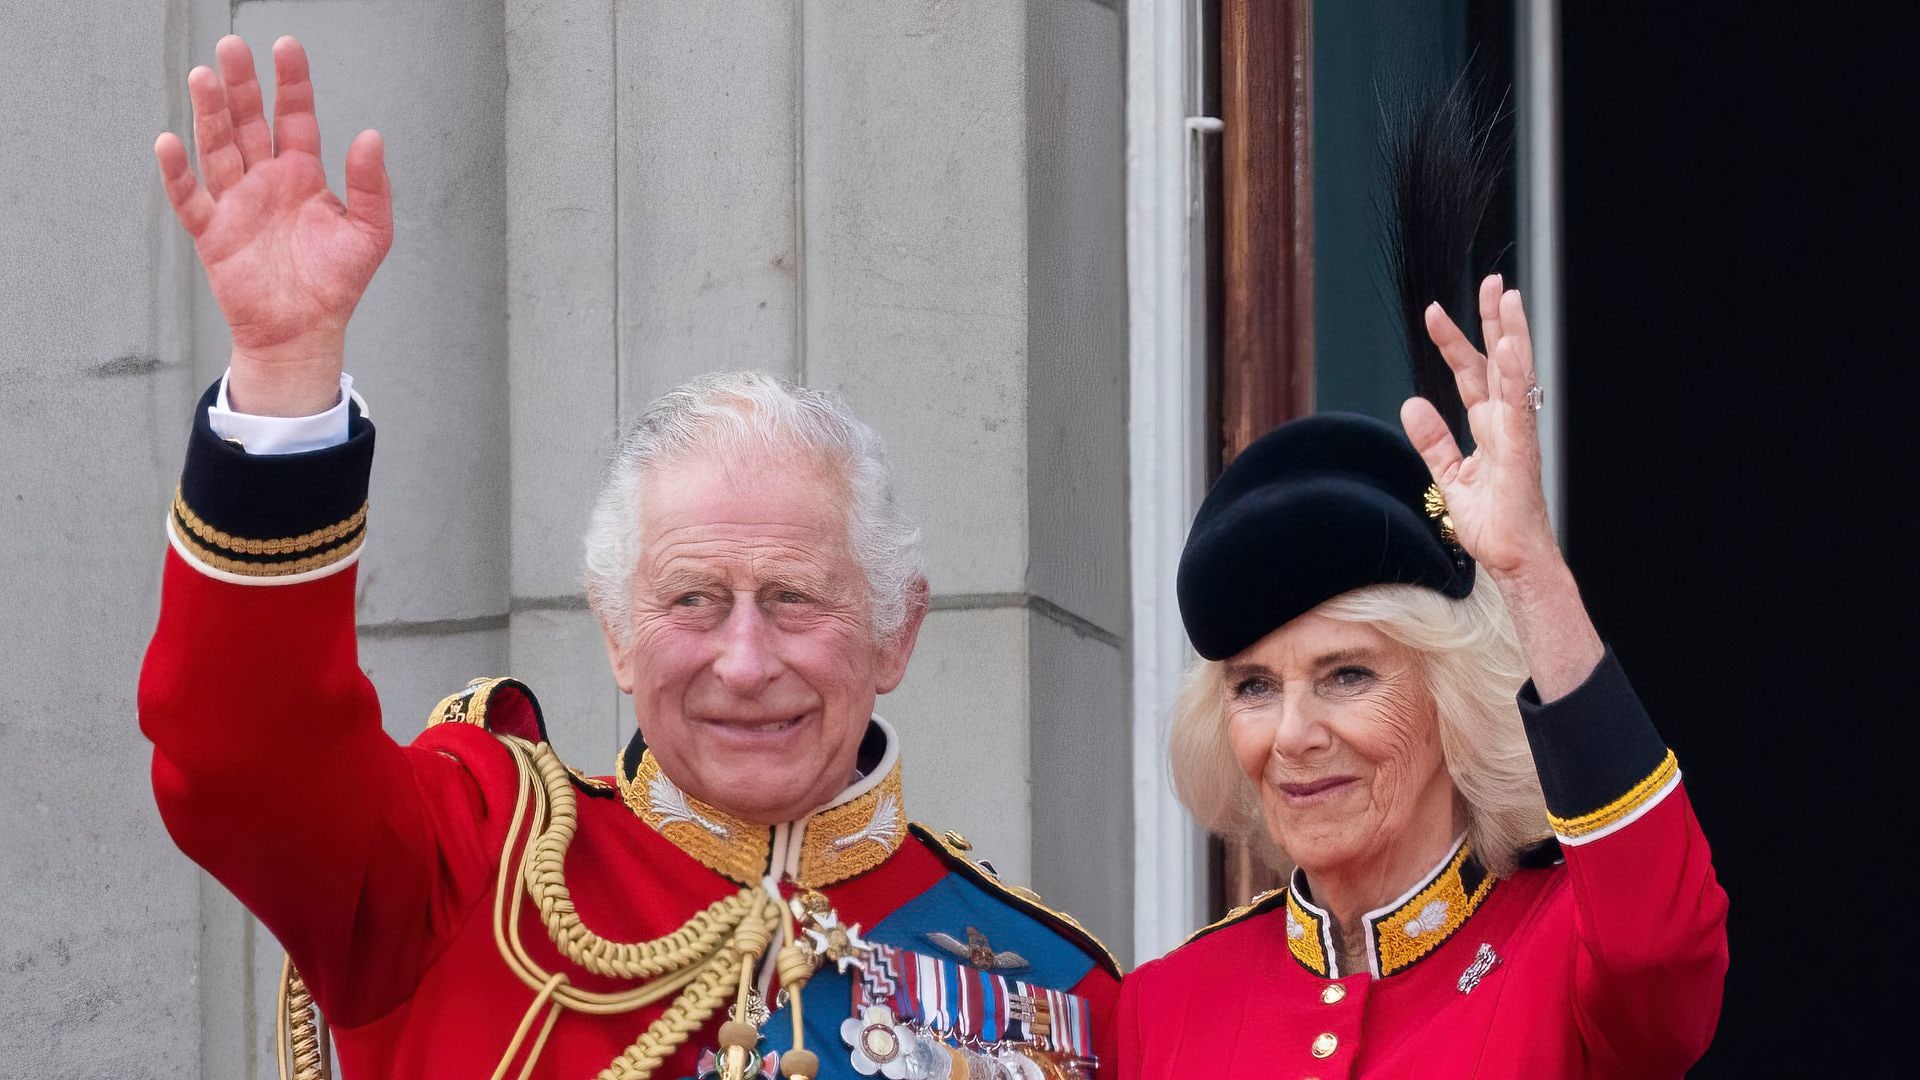 King Charles III and Queen Camilla waving on the royal balcony at Buckingham Palace